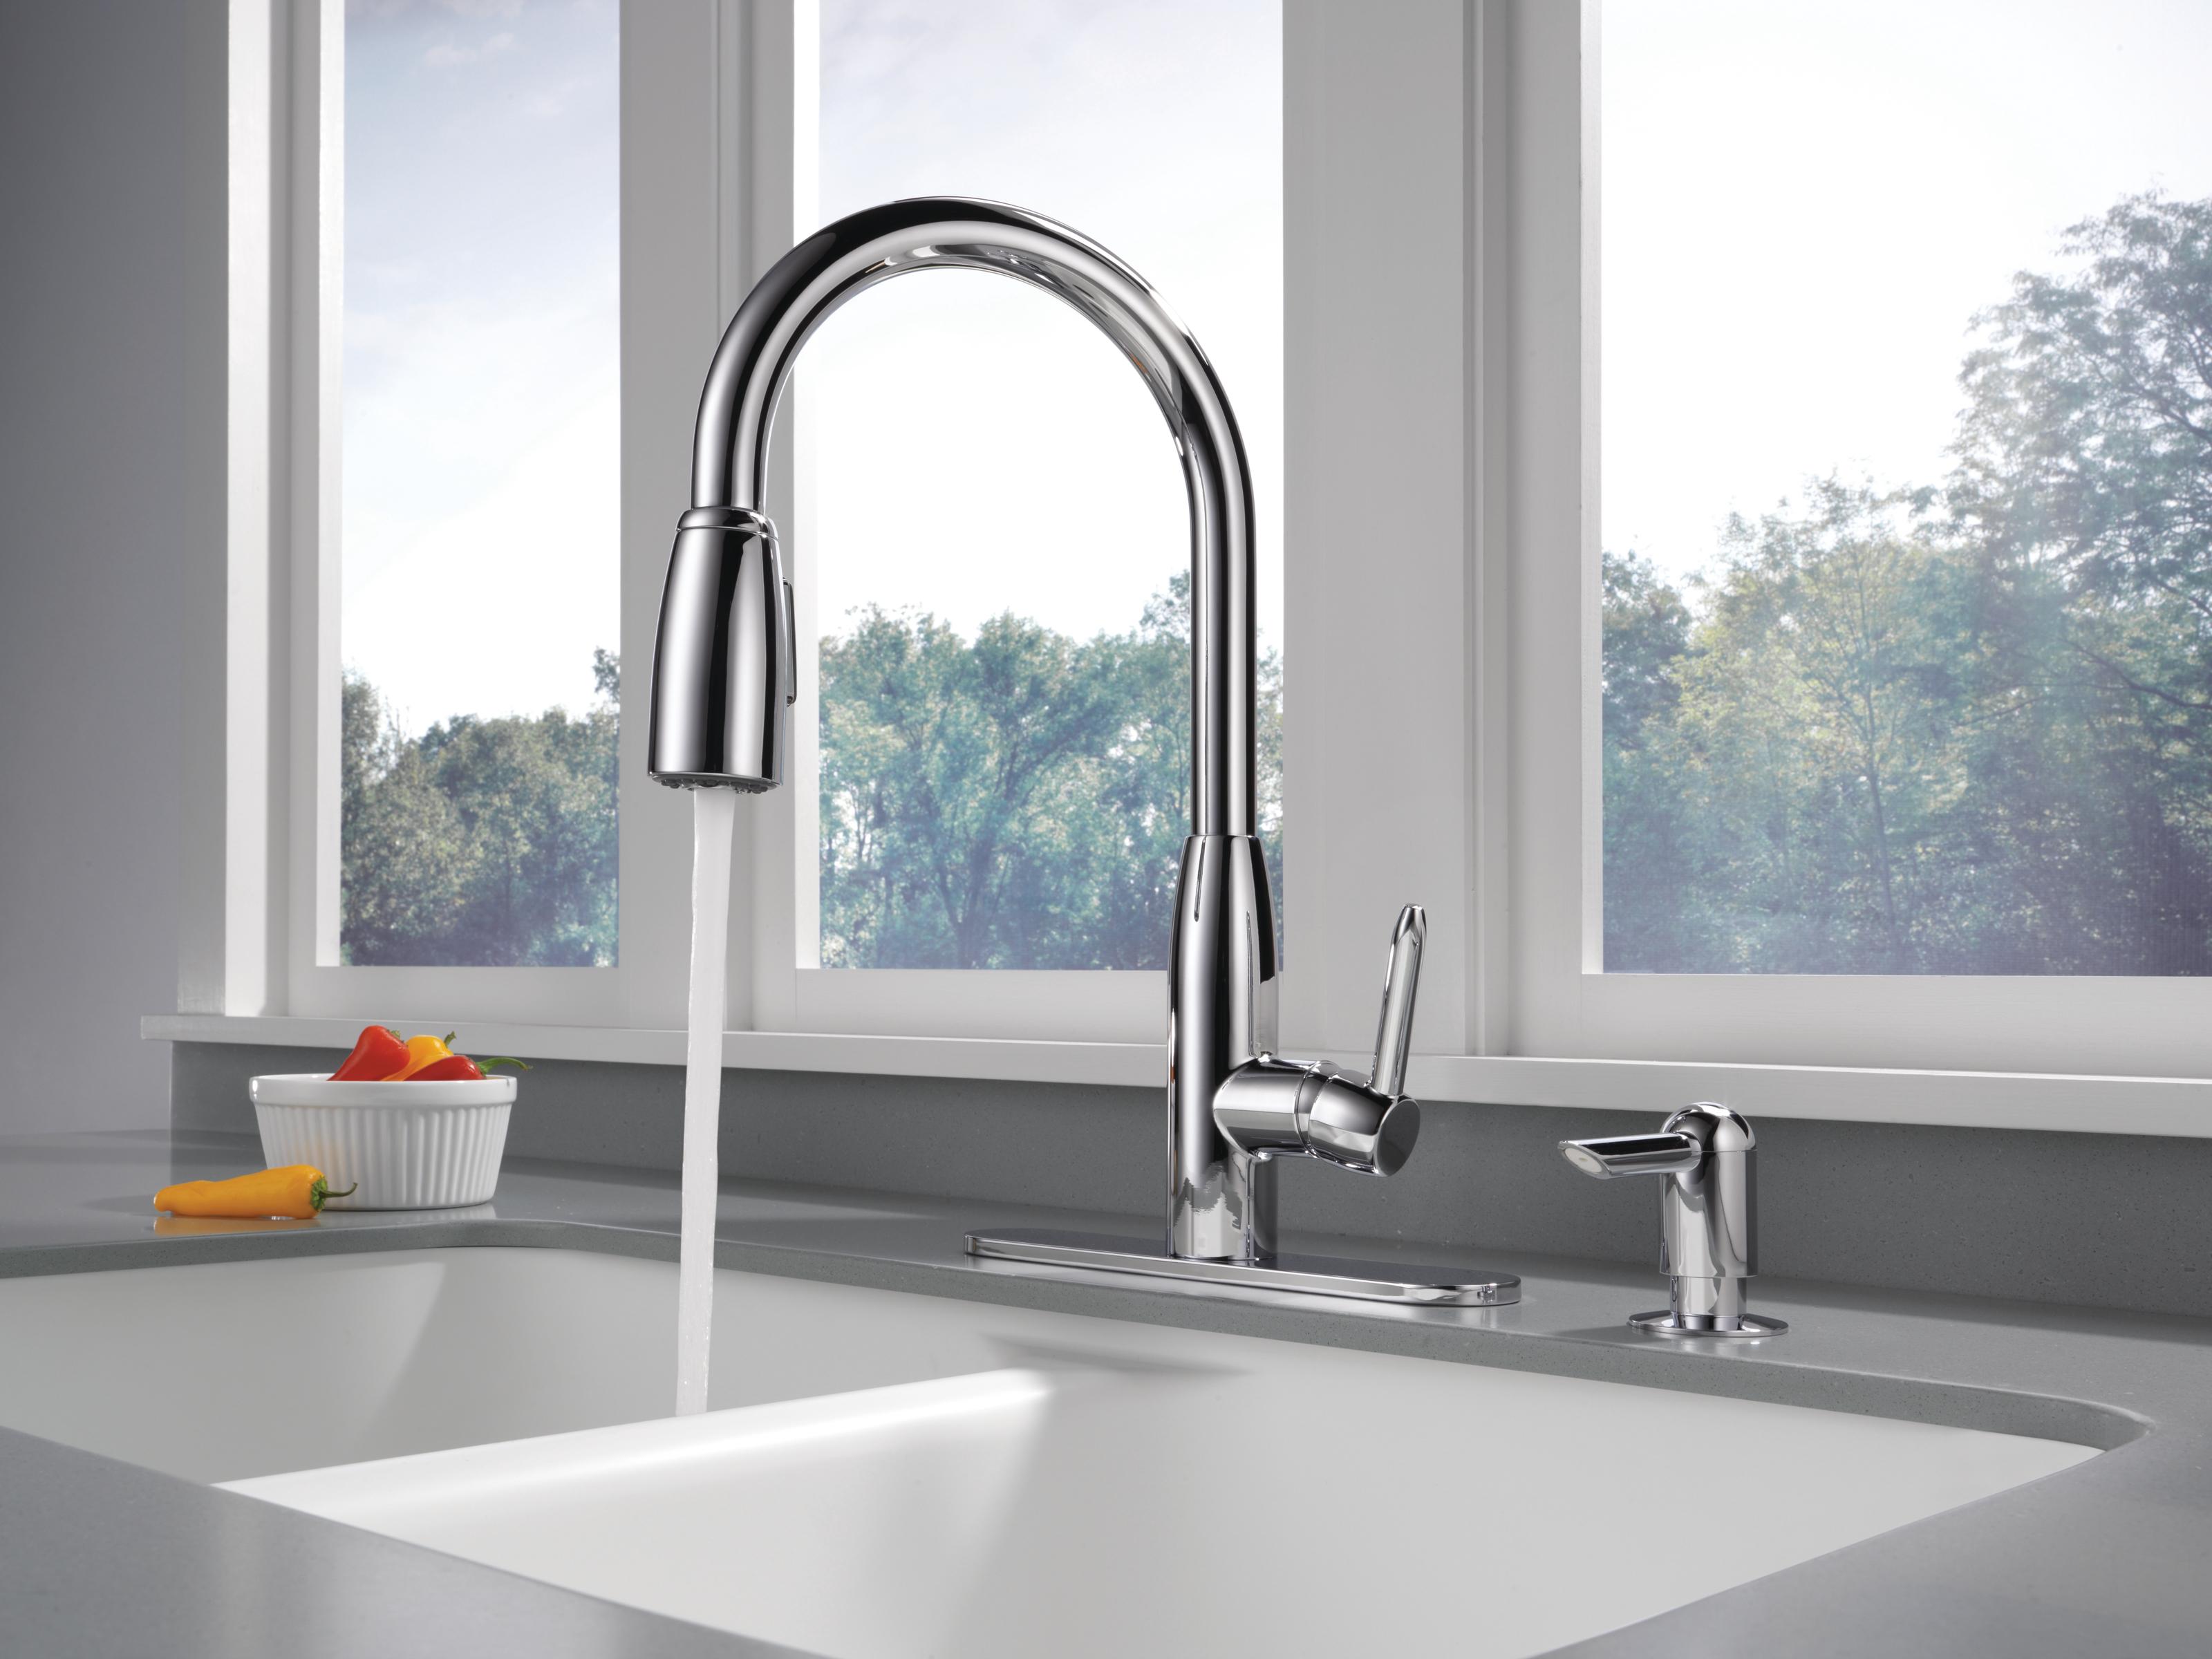 Peerless Core Kitchen Single Handle Pull-Down Faucet in Chrome P88103LF-SD-L - image 11 of 11